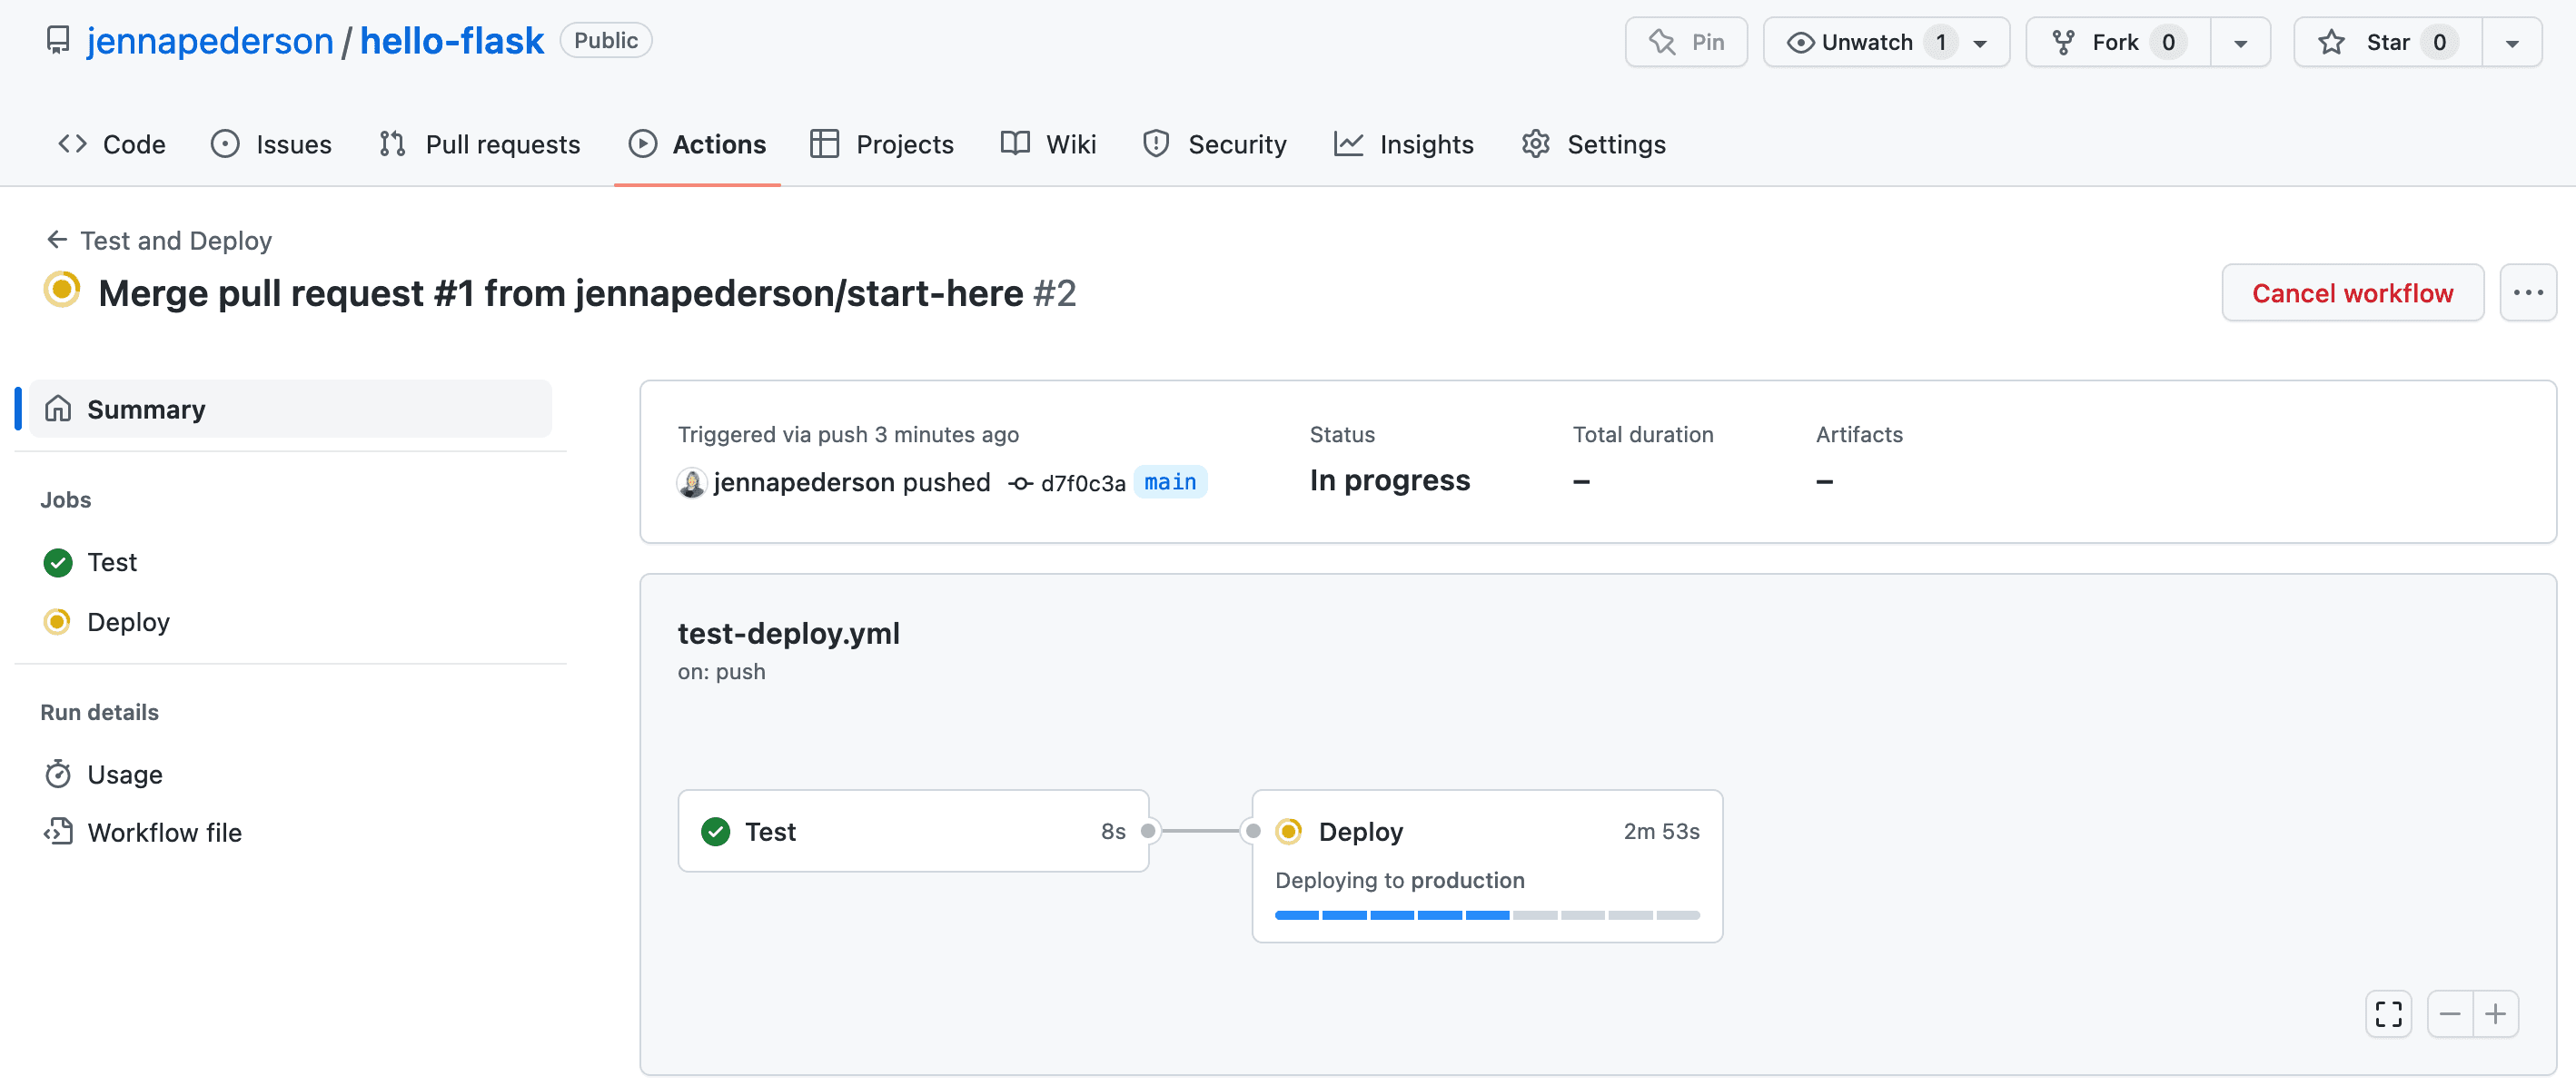 Shows the Actions tab of the hello-flask GitHub repo and the details page of the running workflow, where the Test job has completed successfully and the Deploy job is in progress